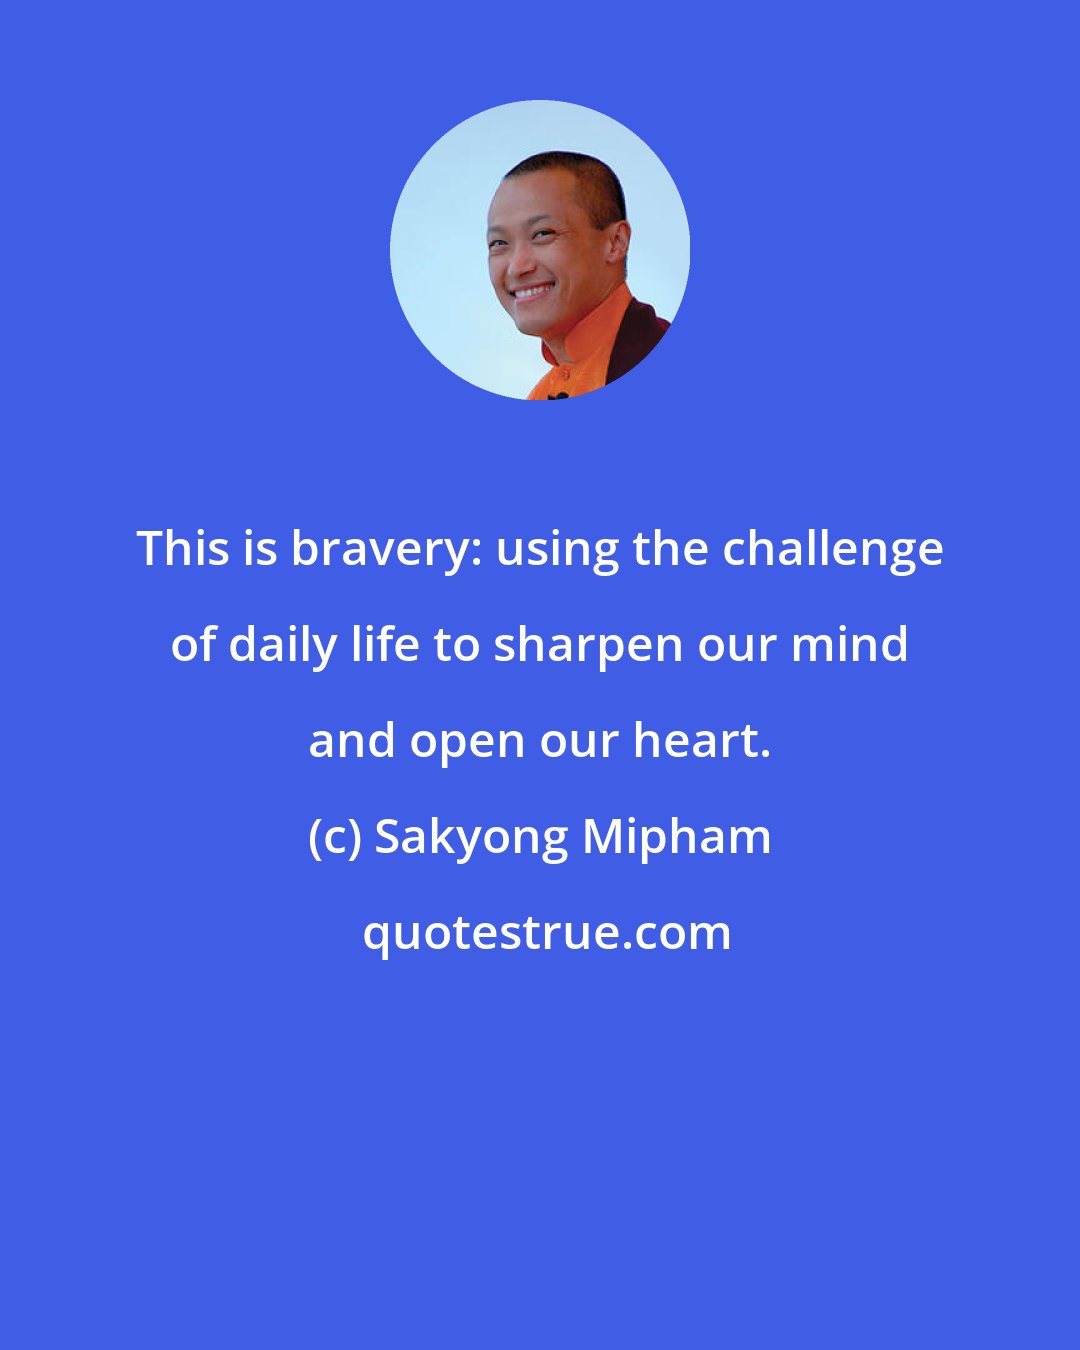 Sakyong Mipham: This is bravery: using the challenge of daily life to sharpen our mind and open our heart.